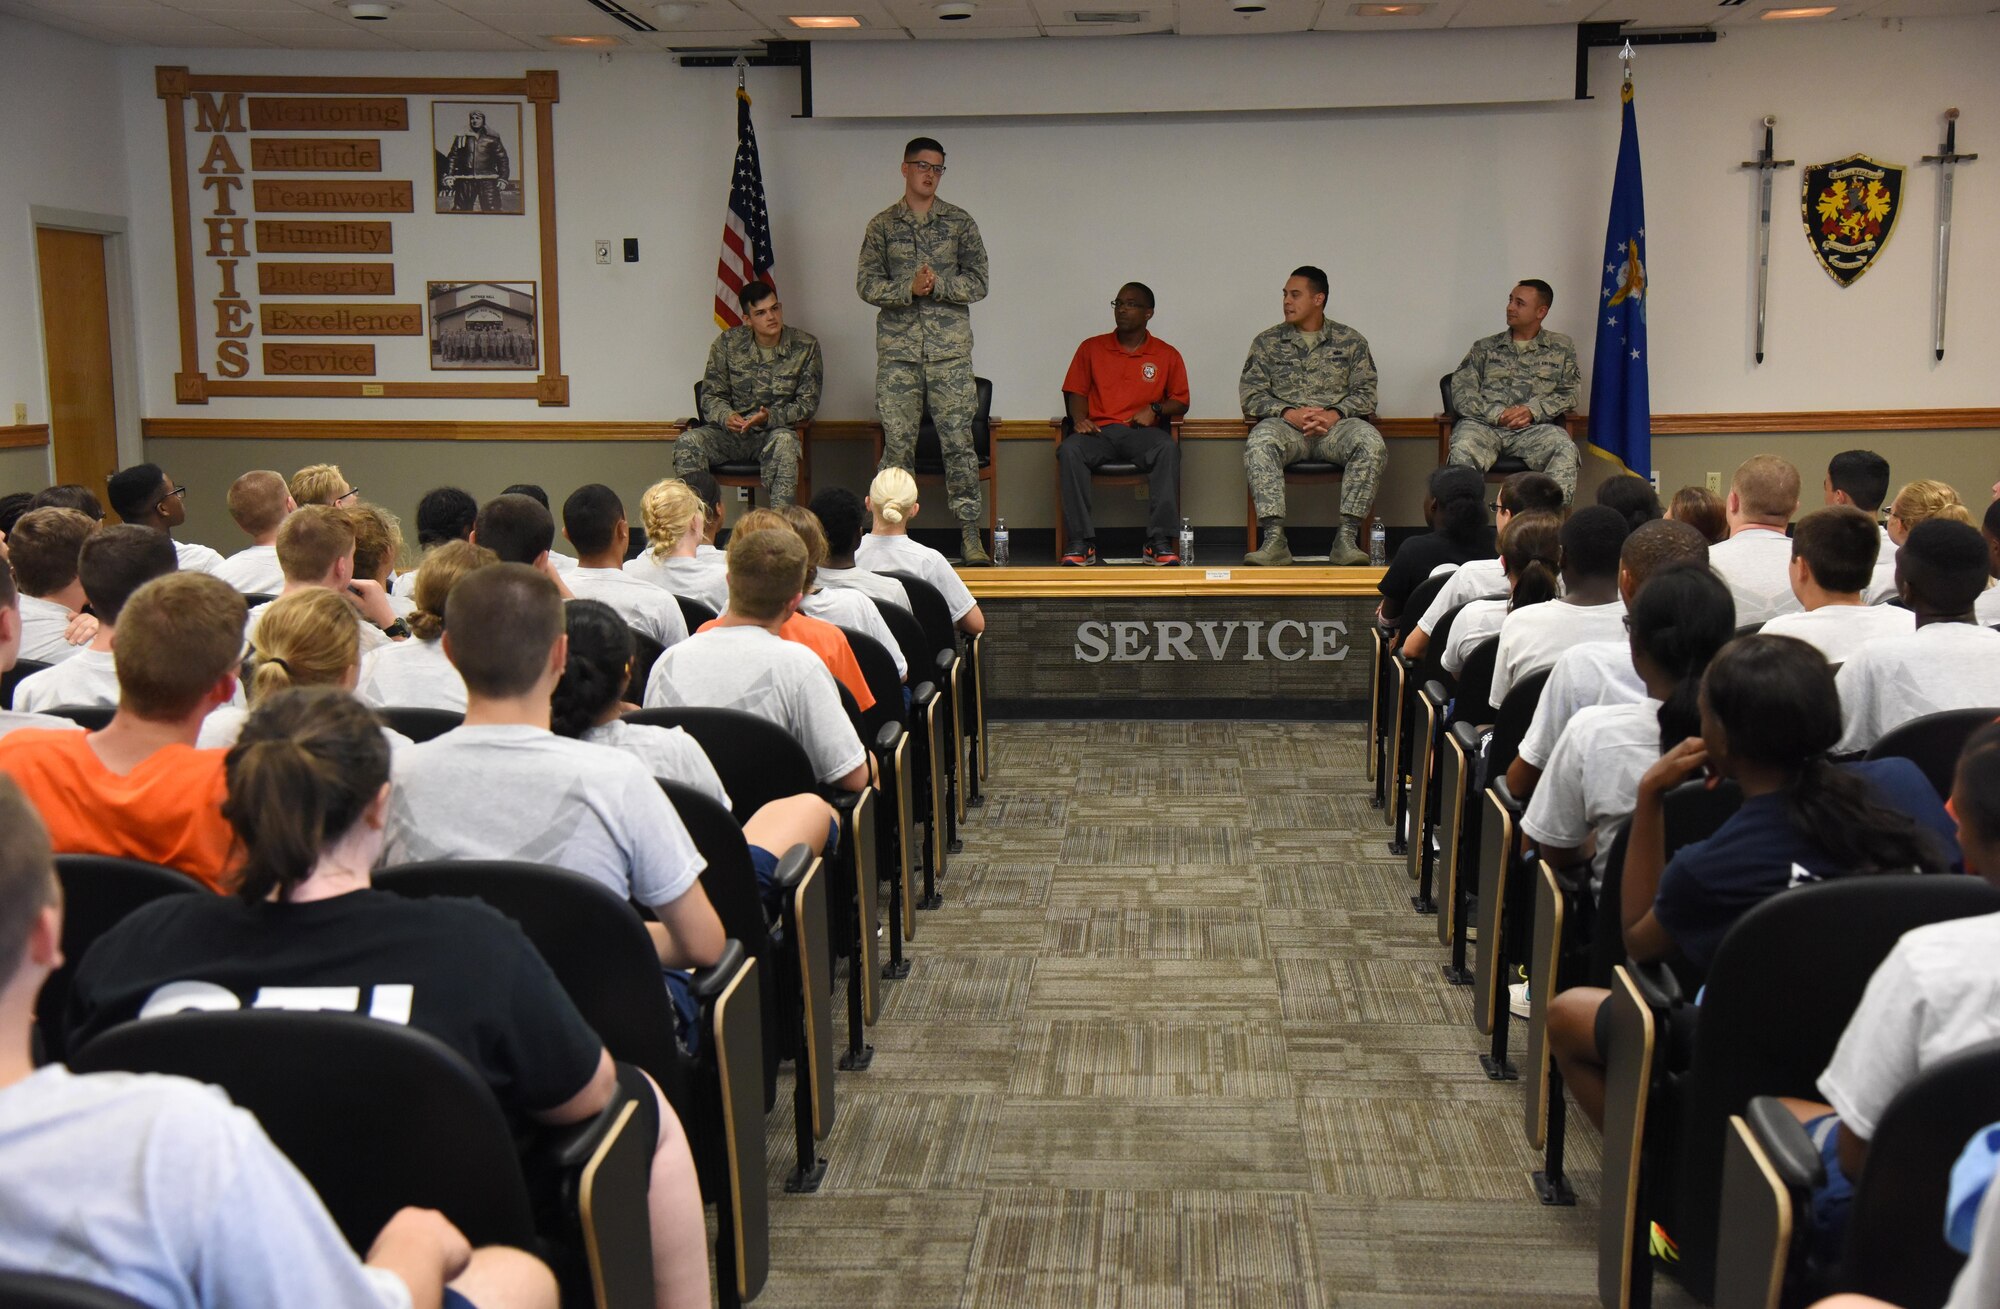 Senior Airman Dylan Sluder-Brehm, 81st Diagnostic and Therapeutics Squadron pharmacy vault custodian, speaks with Air Force Junior ROTC Cadets during an Airman panel during the JROTC Cadet Leadership Course at the Mathies NCO Academy auditorium July 13, 2017, on Keesler Air Force Base, Miss. Approximately 140 JROTC students from 15 high schools in five states attended the week-long course at Keesler that ended with a parade and graduation ceremony. (U.S. Air Force photo by Kemberly Groue)